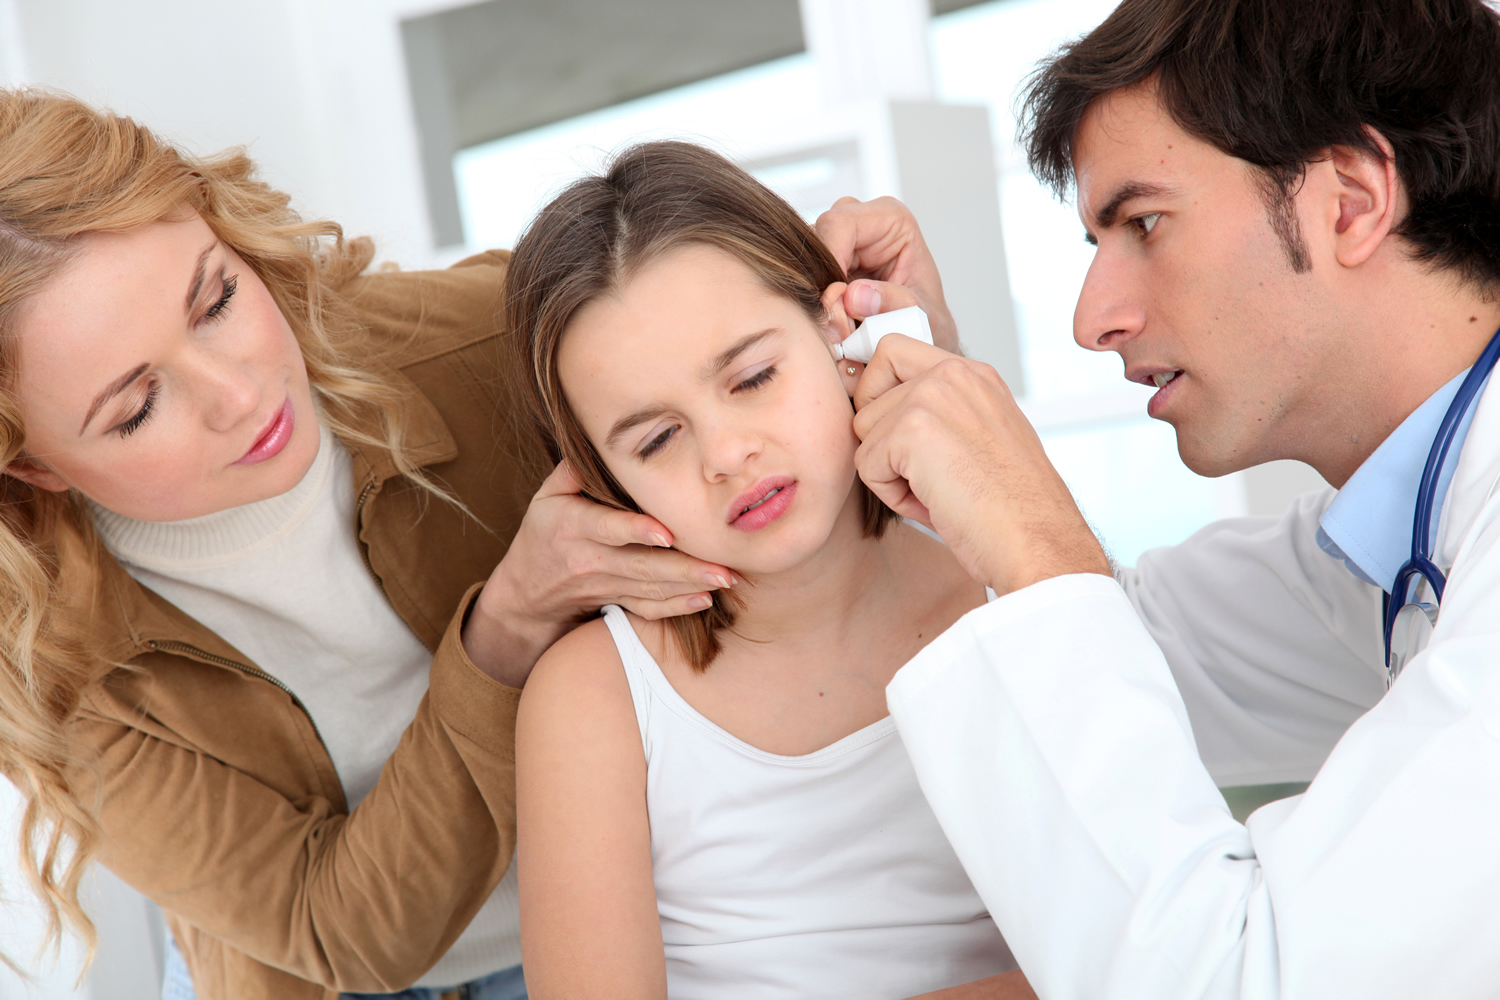 Do I need antibiotics for an ear infection?